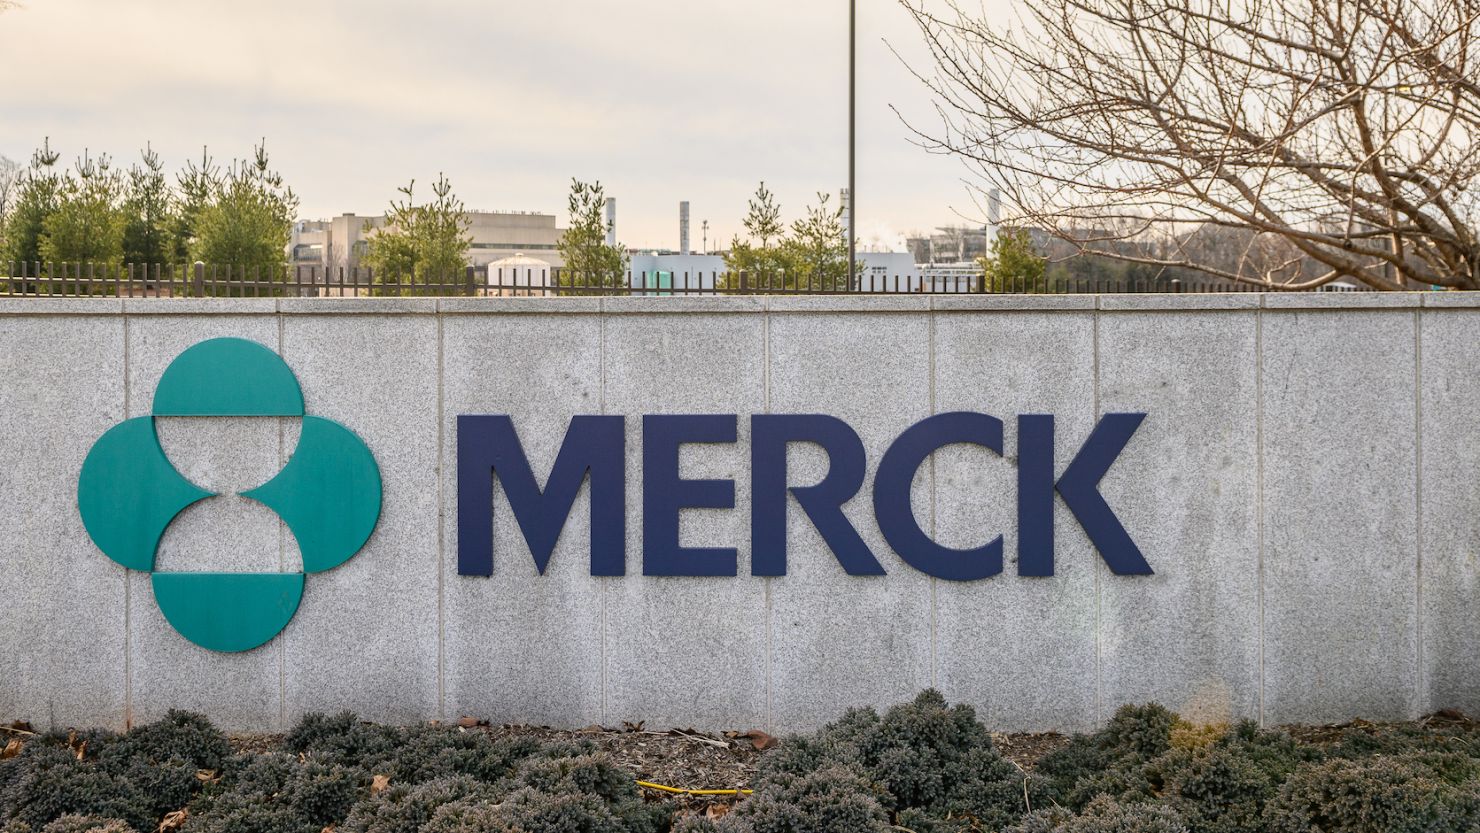 Merck is among the companies that have filed lawsuits seeking to declare drug price negotiations in Medicare unconstitutional.